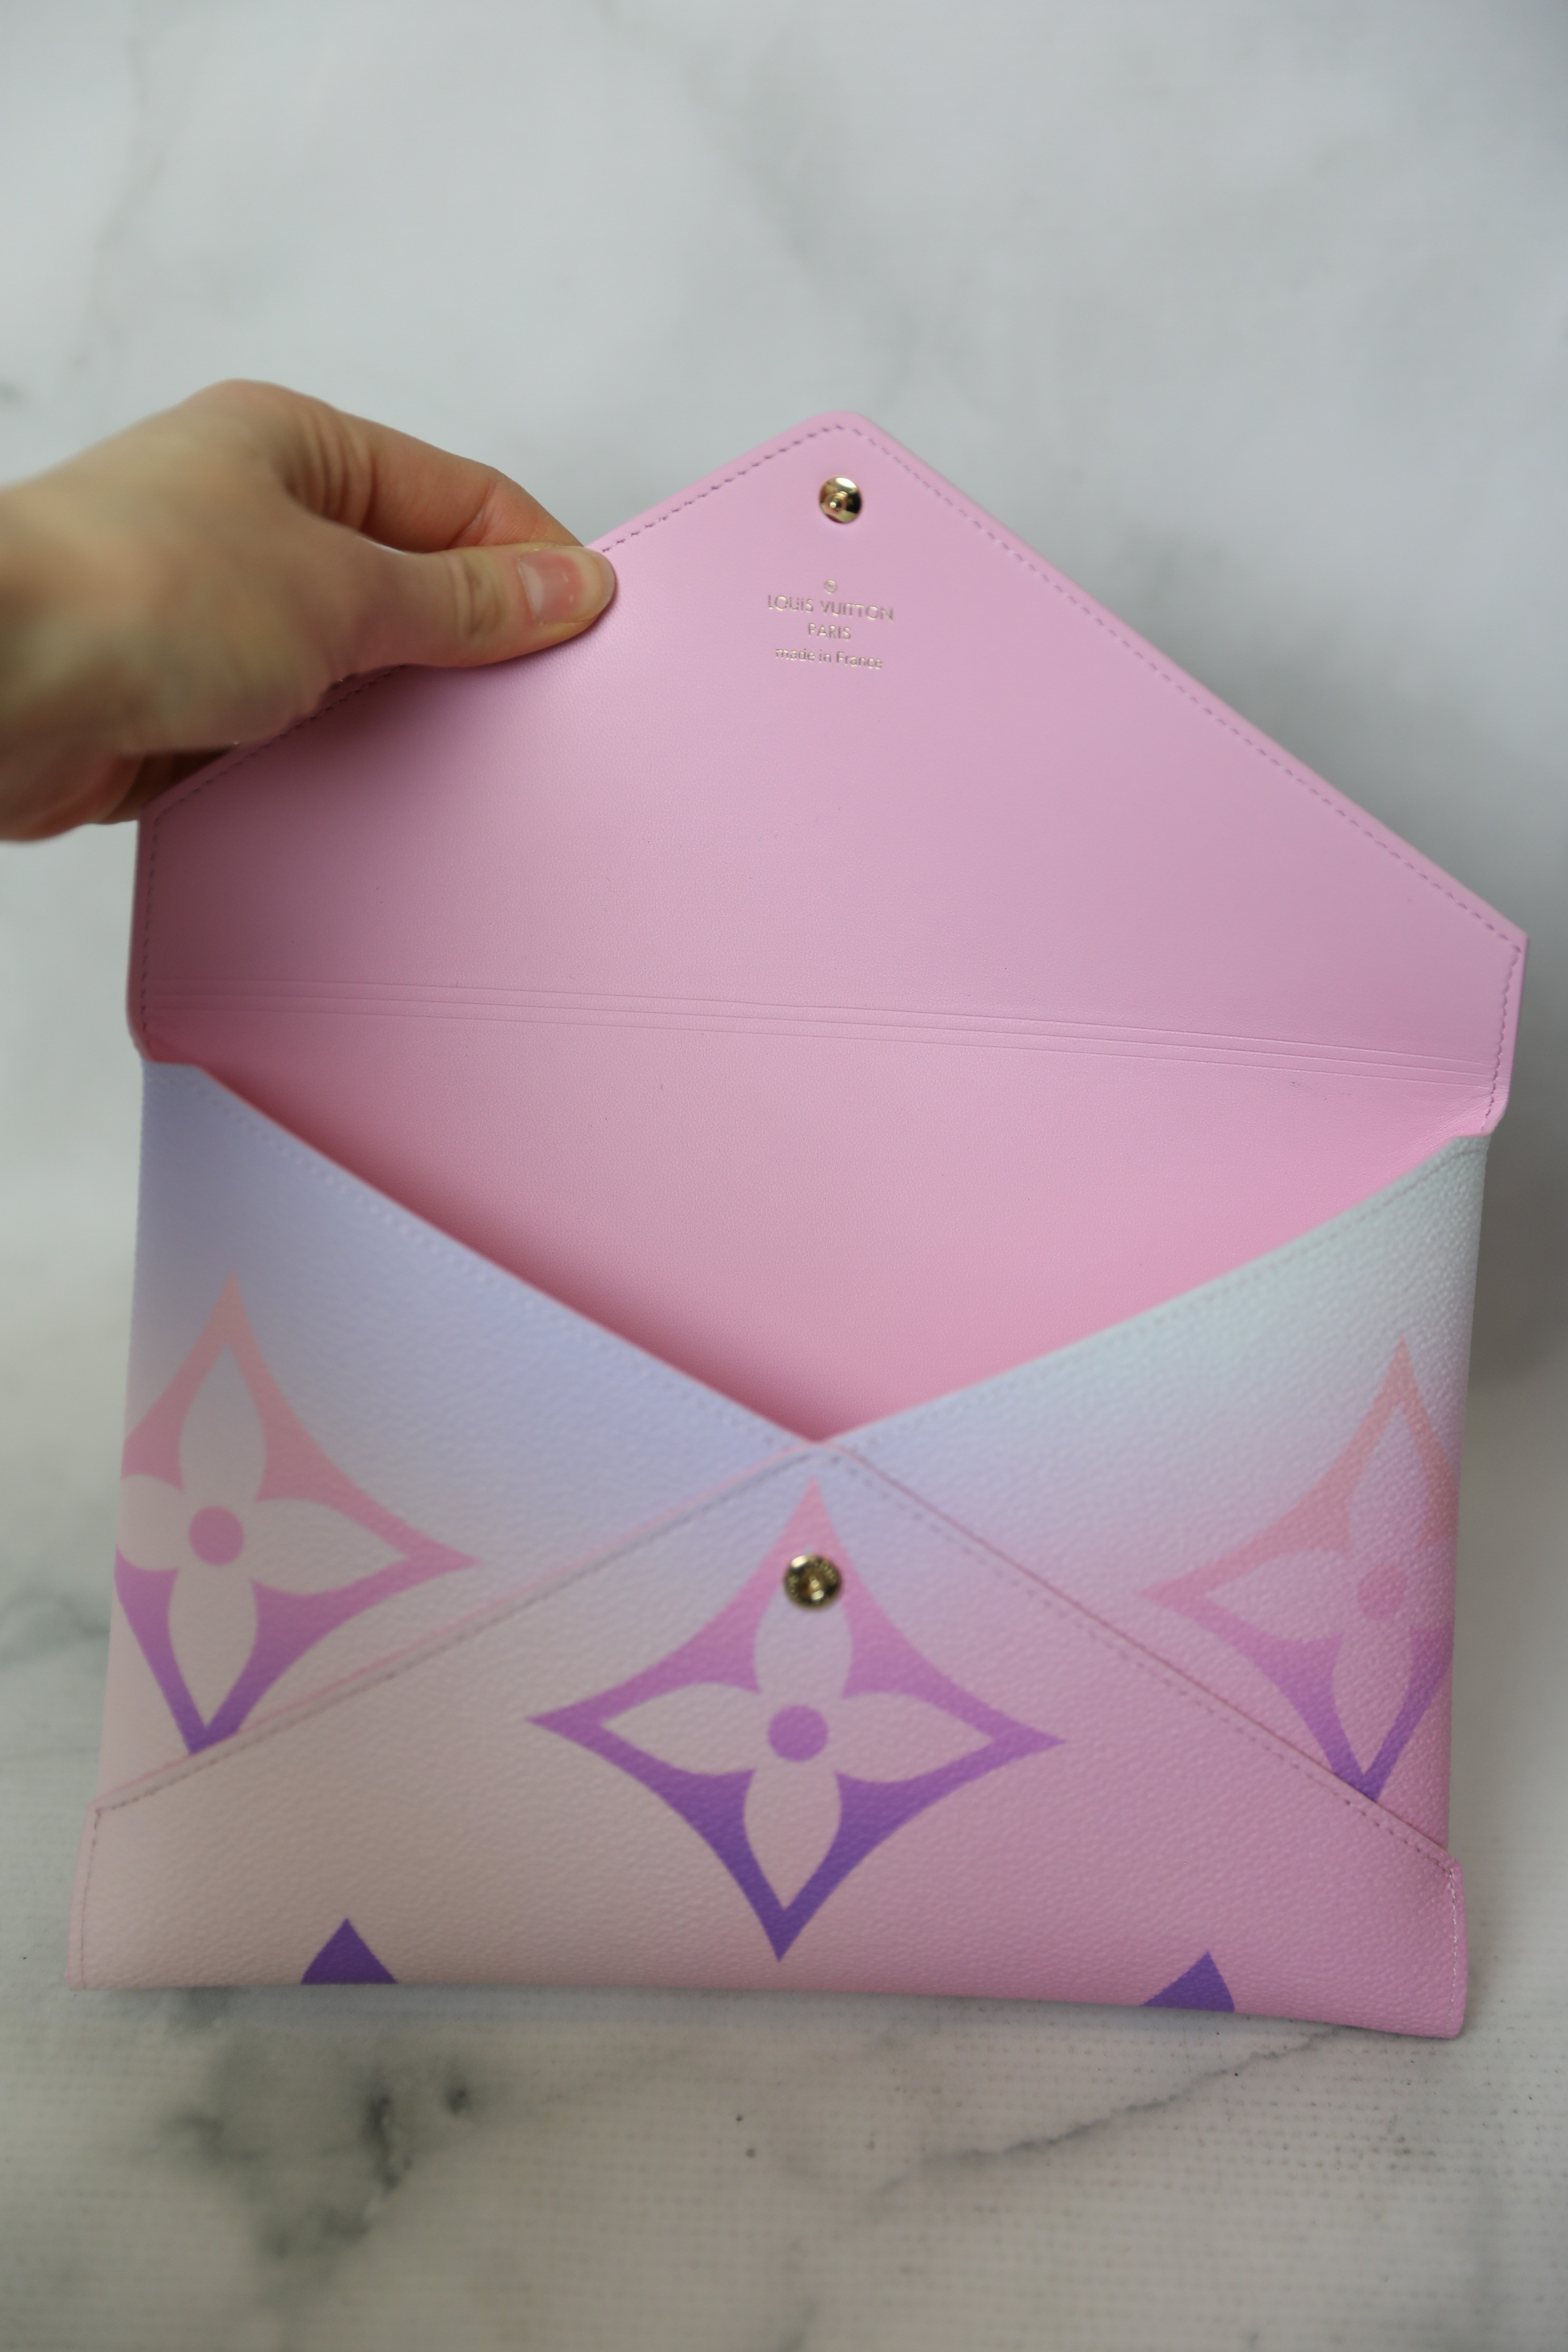 Louis Vuitton Kirigami - Sunrise Pastel - Largest of 3 - New In Box Dustbag